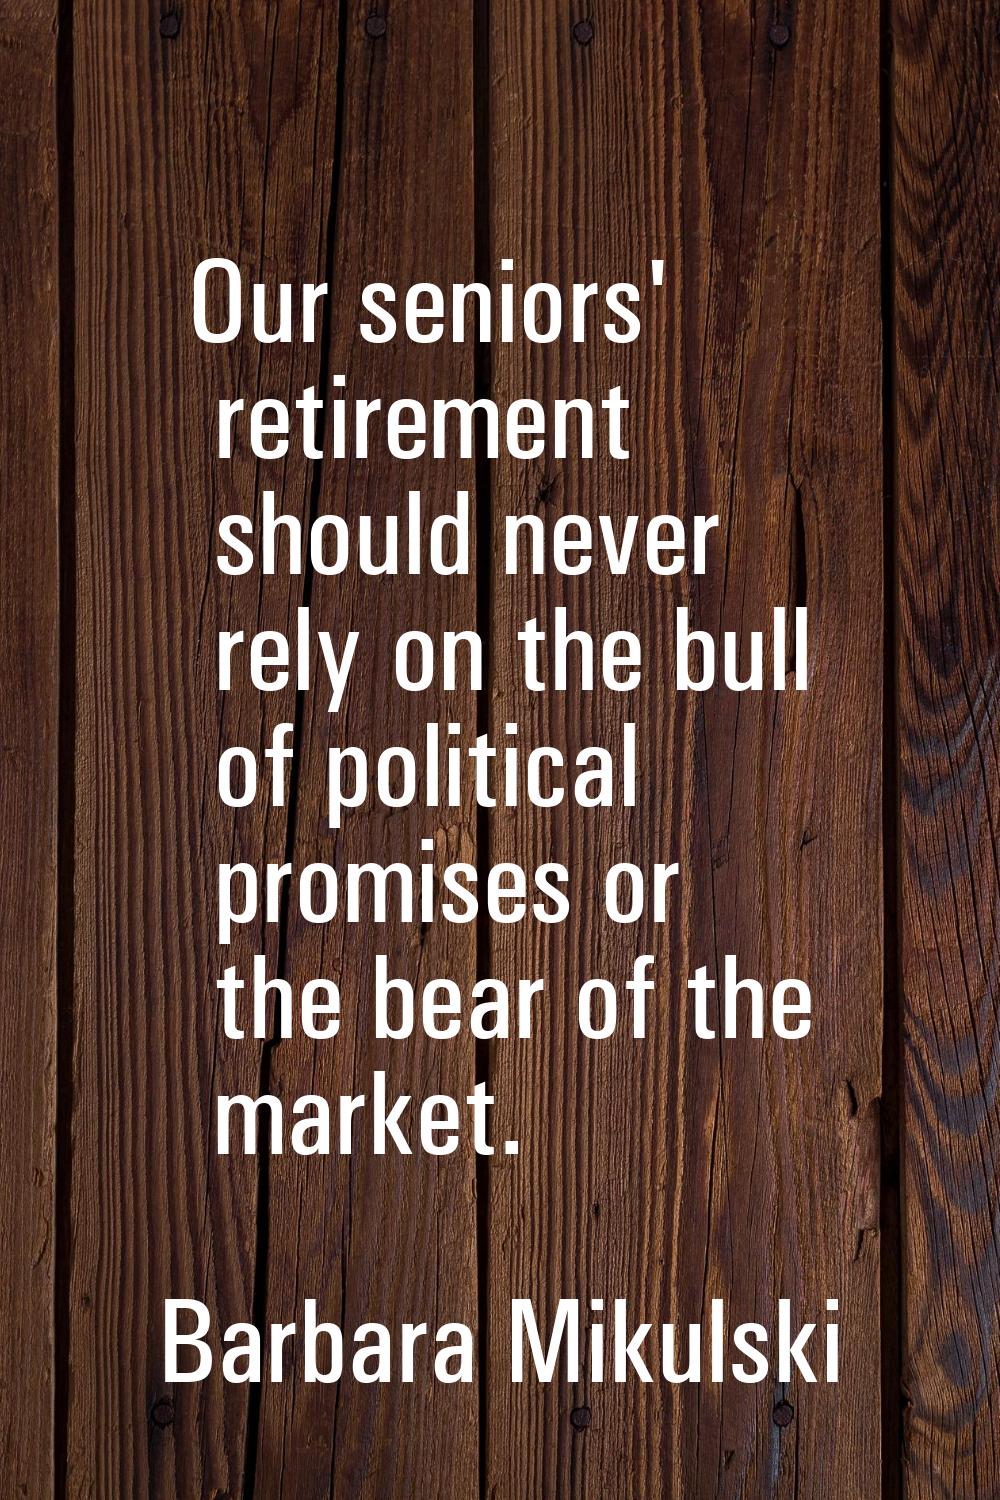 Our seniors' retirement should never rely on the bull of political promises or the bear of the mark